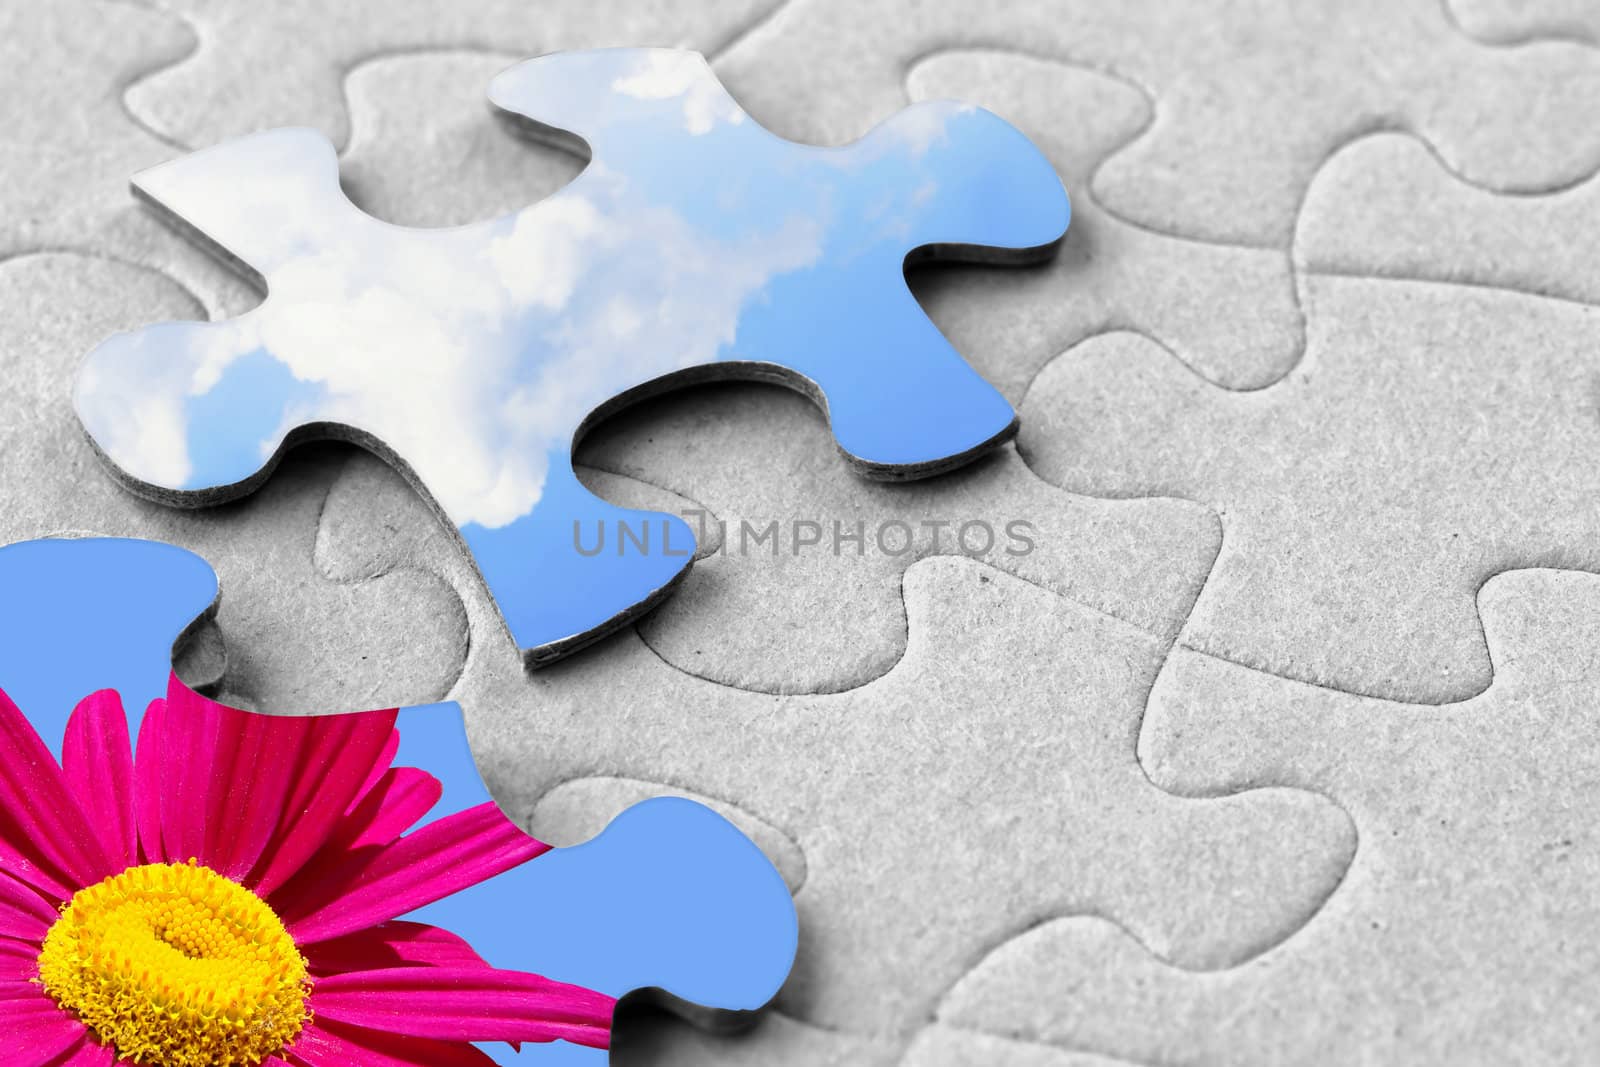 A piece of sky: contrast of grey cardboard jigsaw puzzle with blue sky and clouds and bright pink flower.